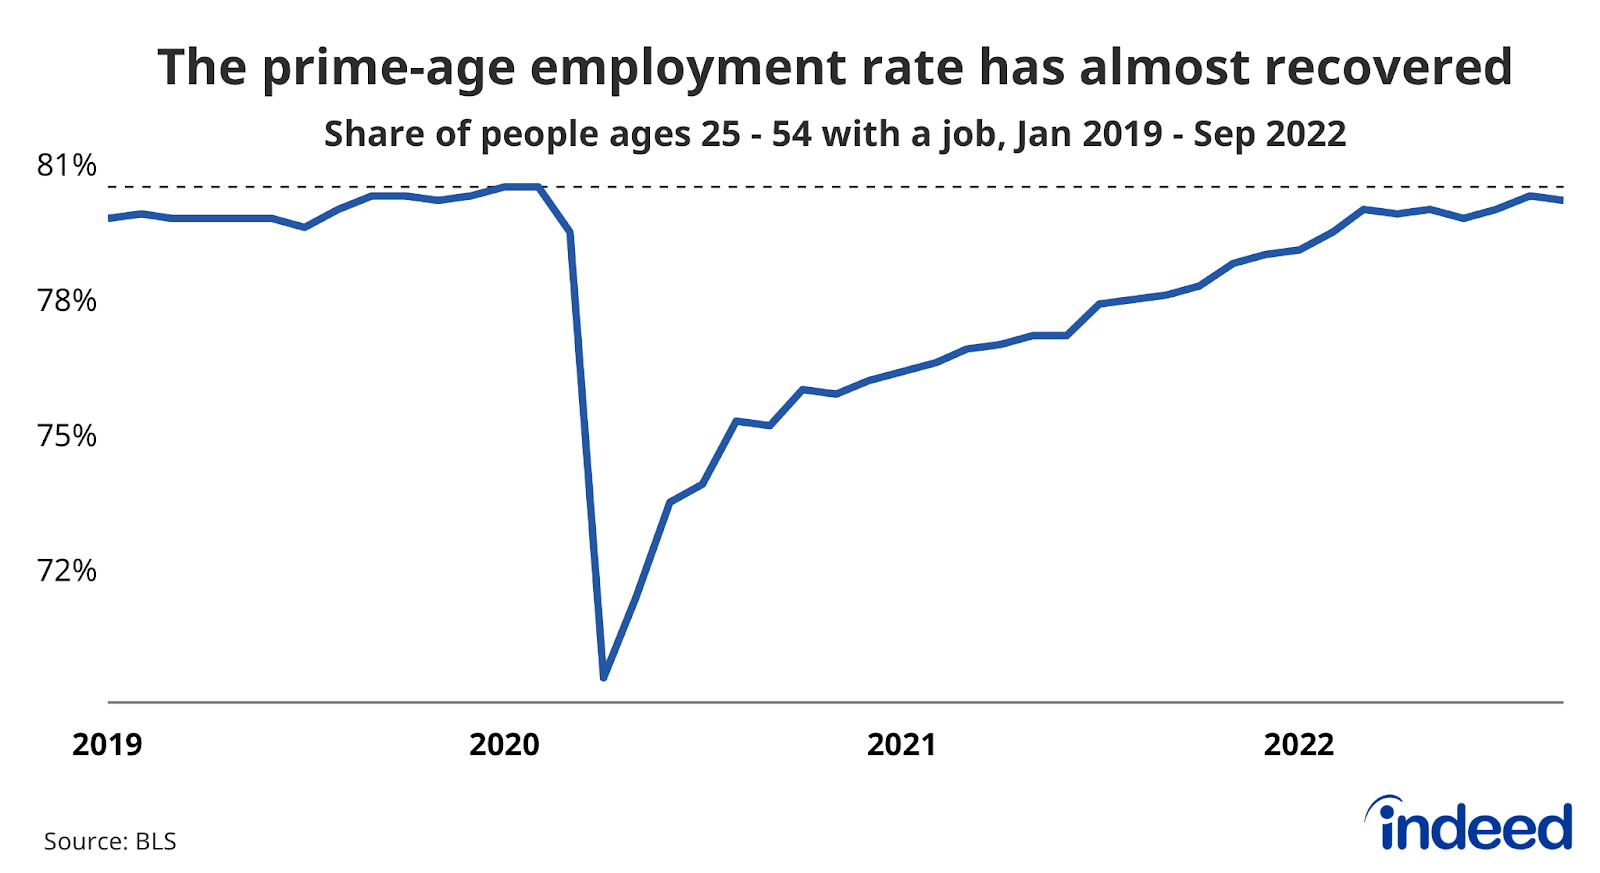 Line graph titled “The prime-age employment rate is almost fully recovered” with a vertical axis ranging from 72 to 81, tracking the share of the population ages 25 to 54 with a job.